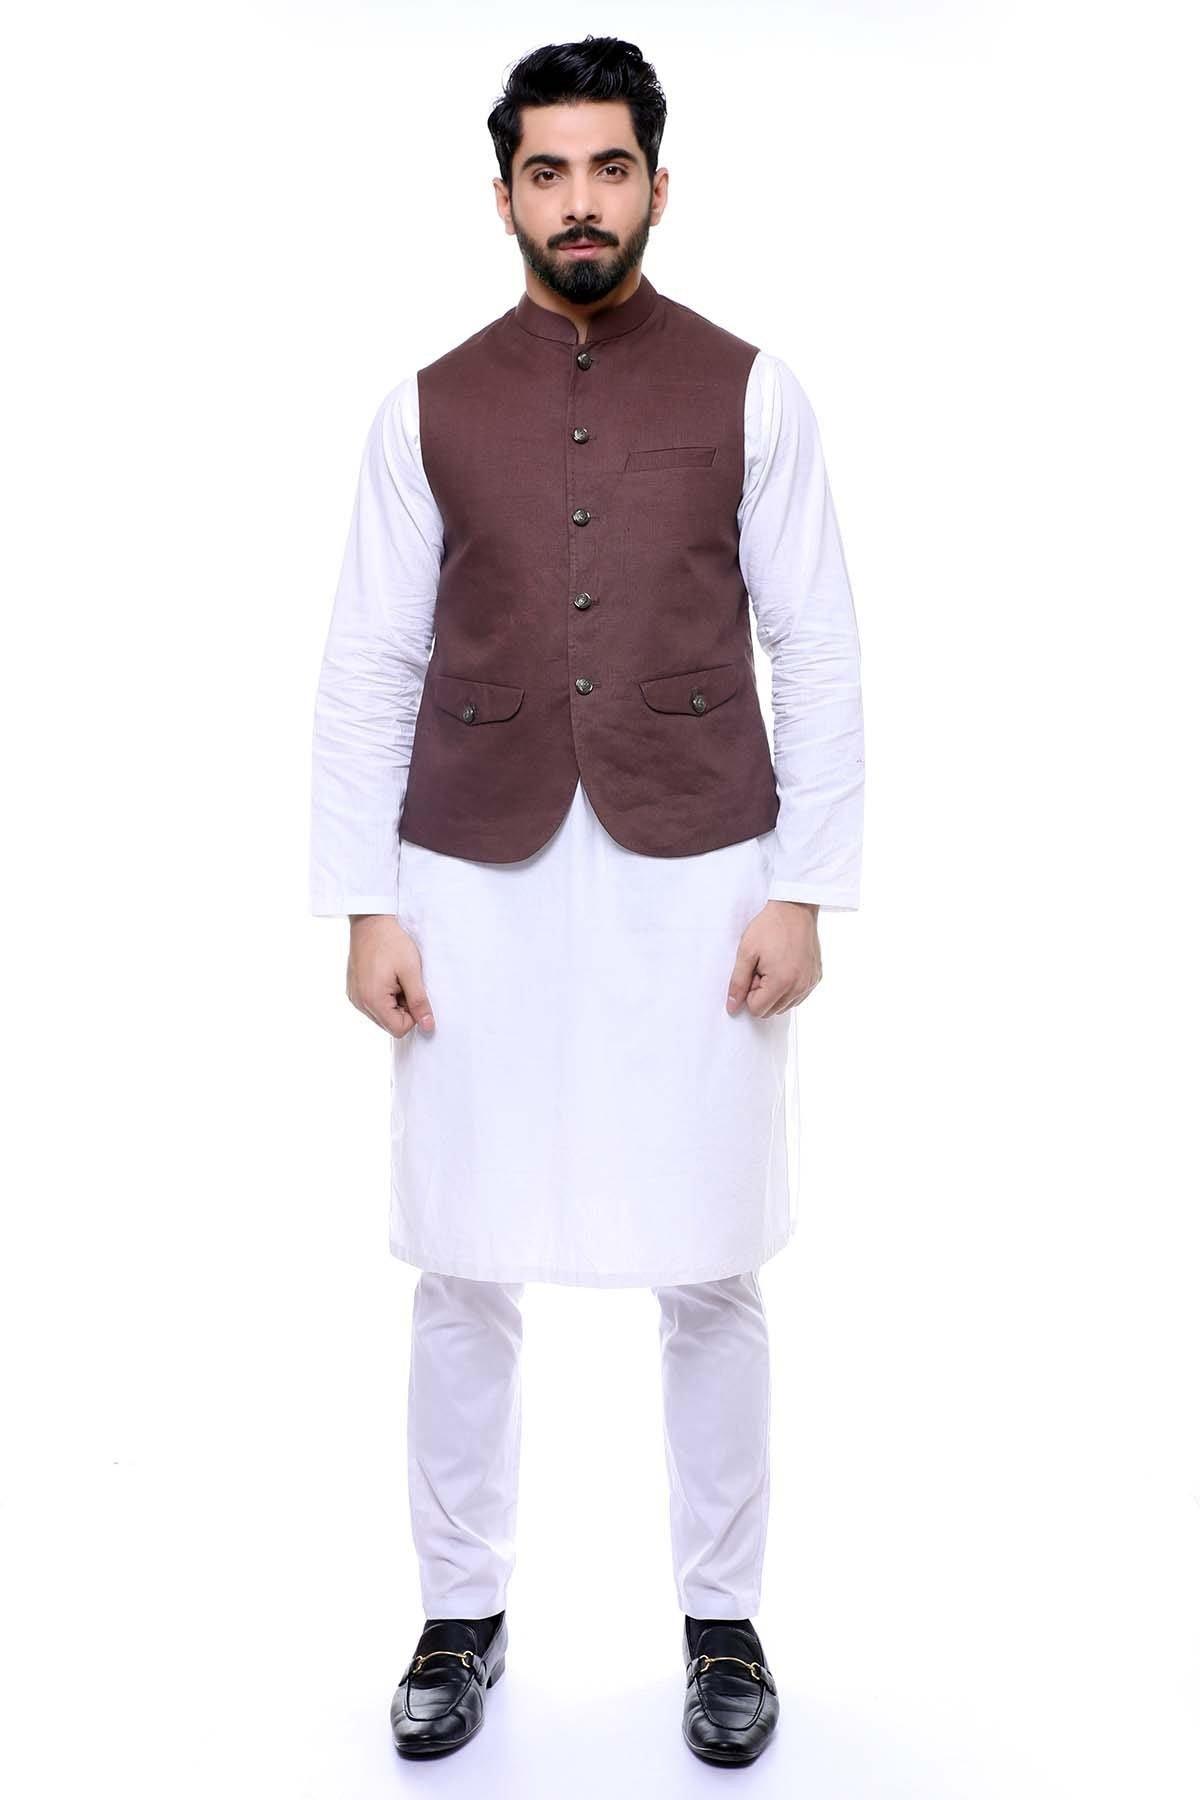 WAIST COAT CHOCOLATE BROWN at Charcoal Clothing